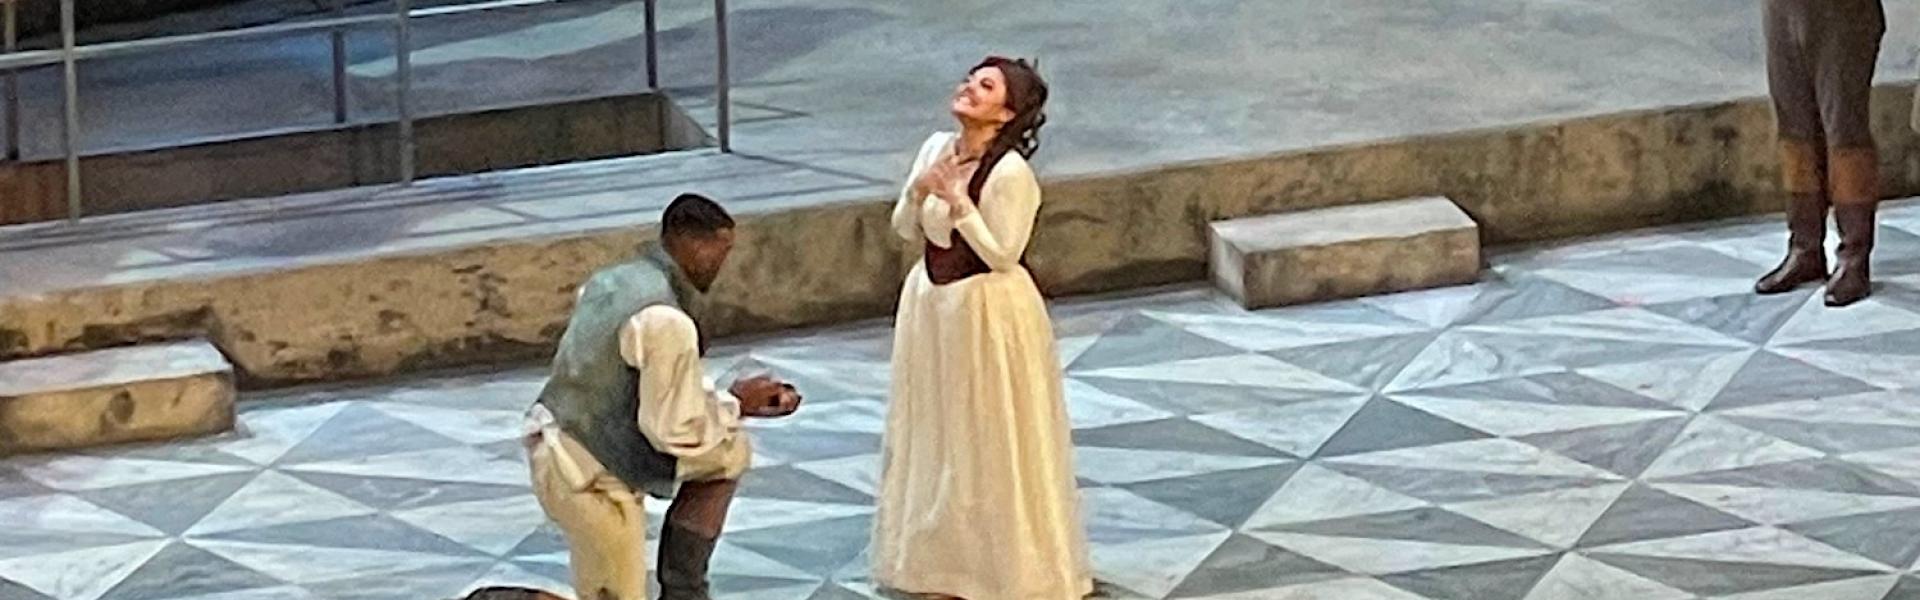 A proposal in SFO's "Tosca"